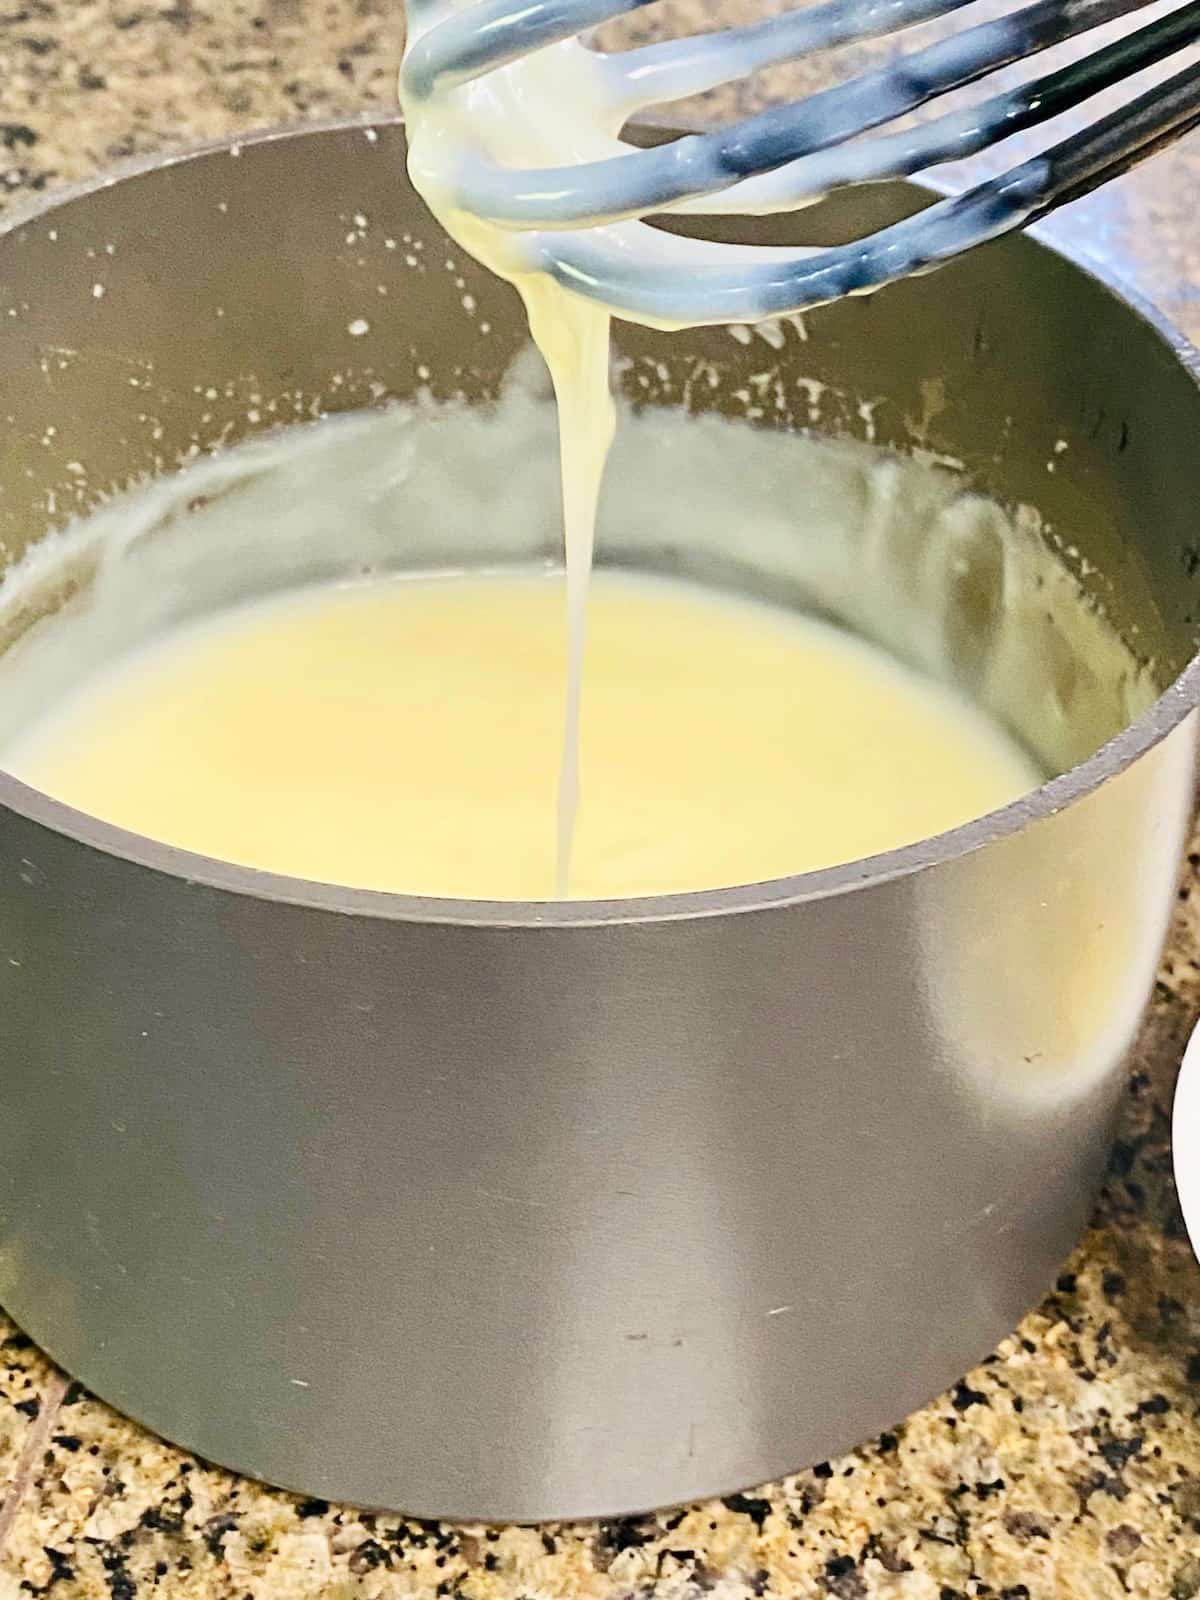 Whisk dipped into pot of cooked cream sugar custard showing thickness and a wide drip from whisk to pot contents.